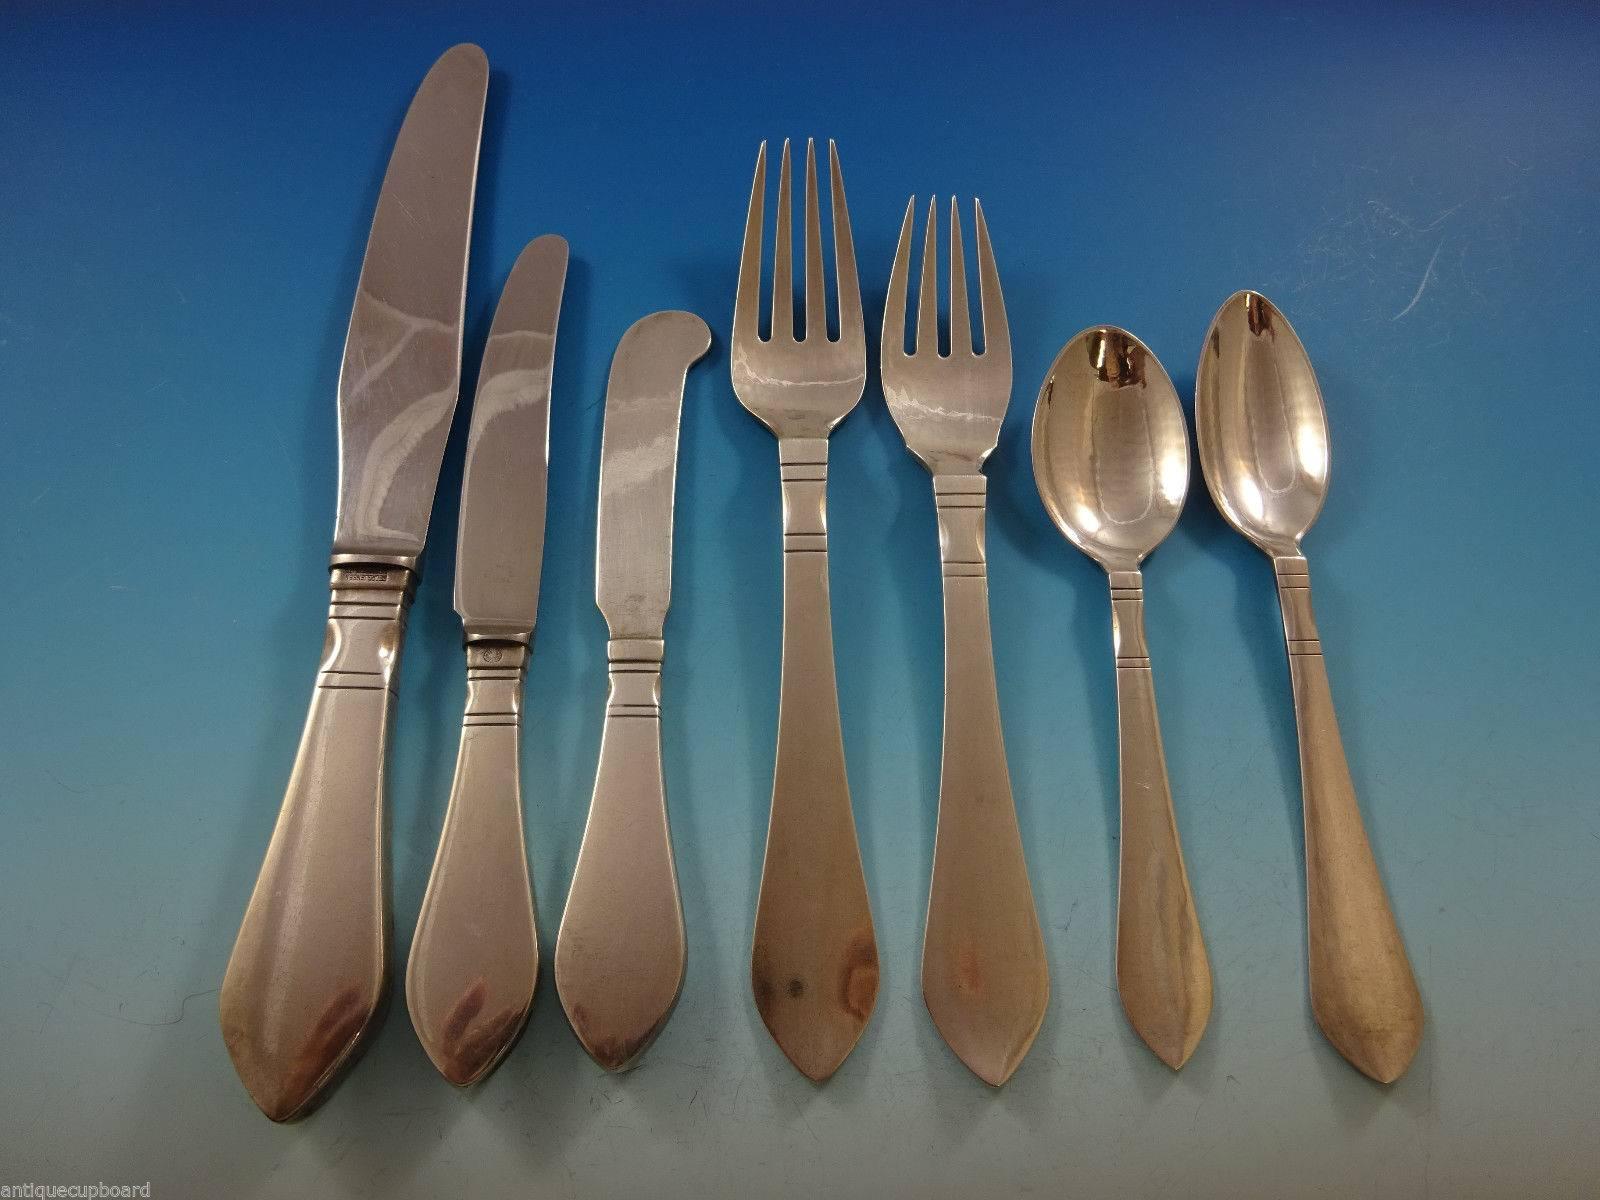 Designed in 1906 by Georg Jensen, the continental cutlery pattern was the first major cutlery range to emerge from the fledgling silversmithy that was established two years earlier in 1904. In designing continental, Georg Jensen was inspired by the